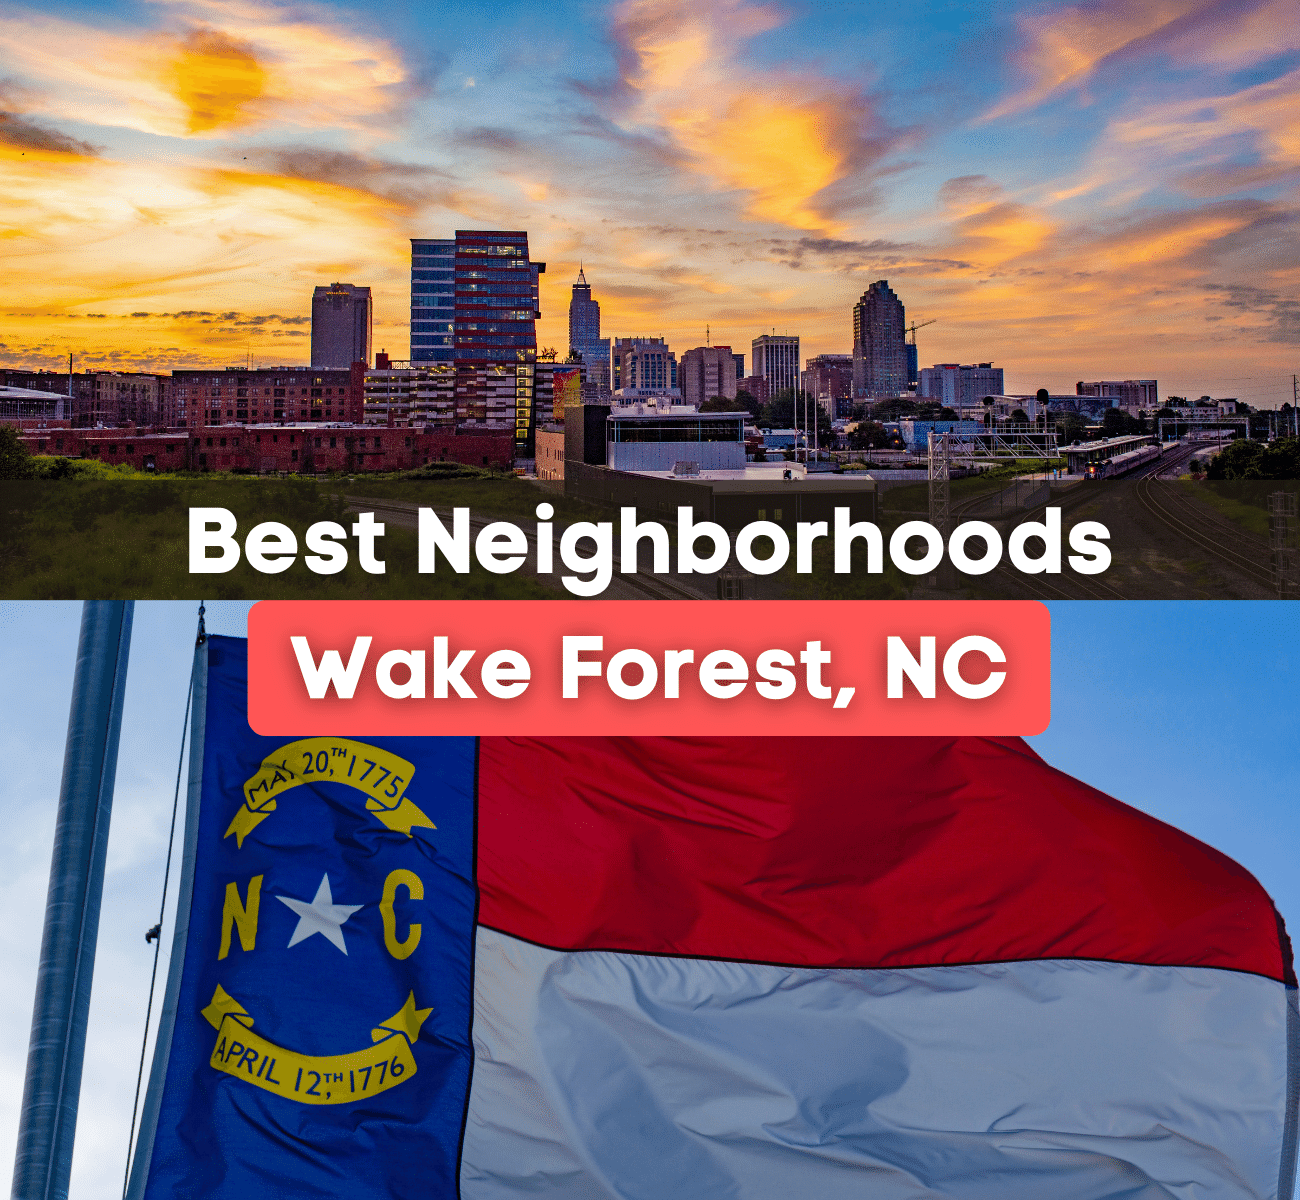 Best Neighborhoods in Wake Forest - Where are the best places to live in Wake Forest, NC?